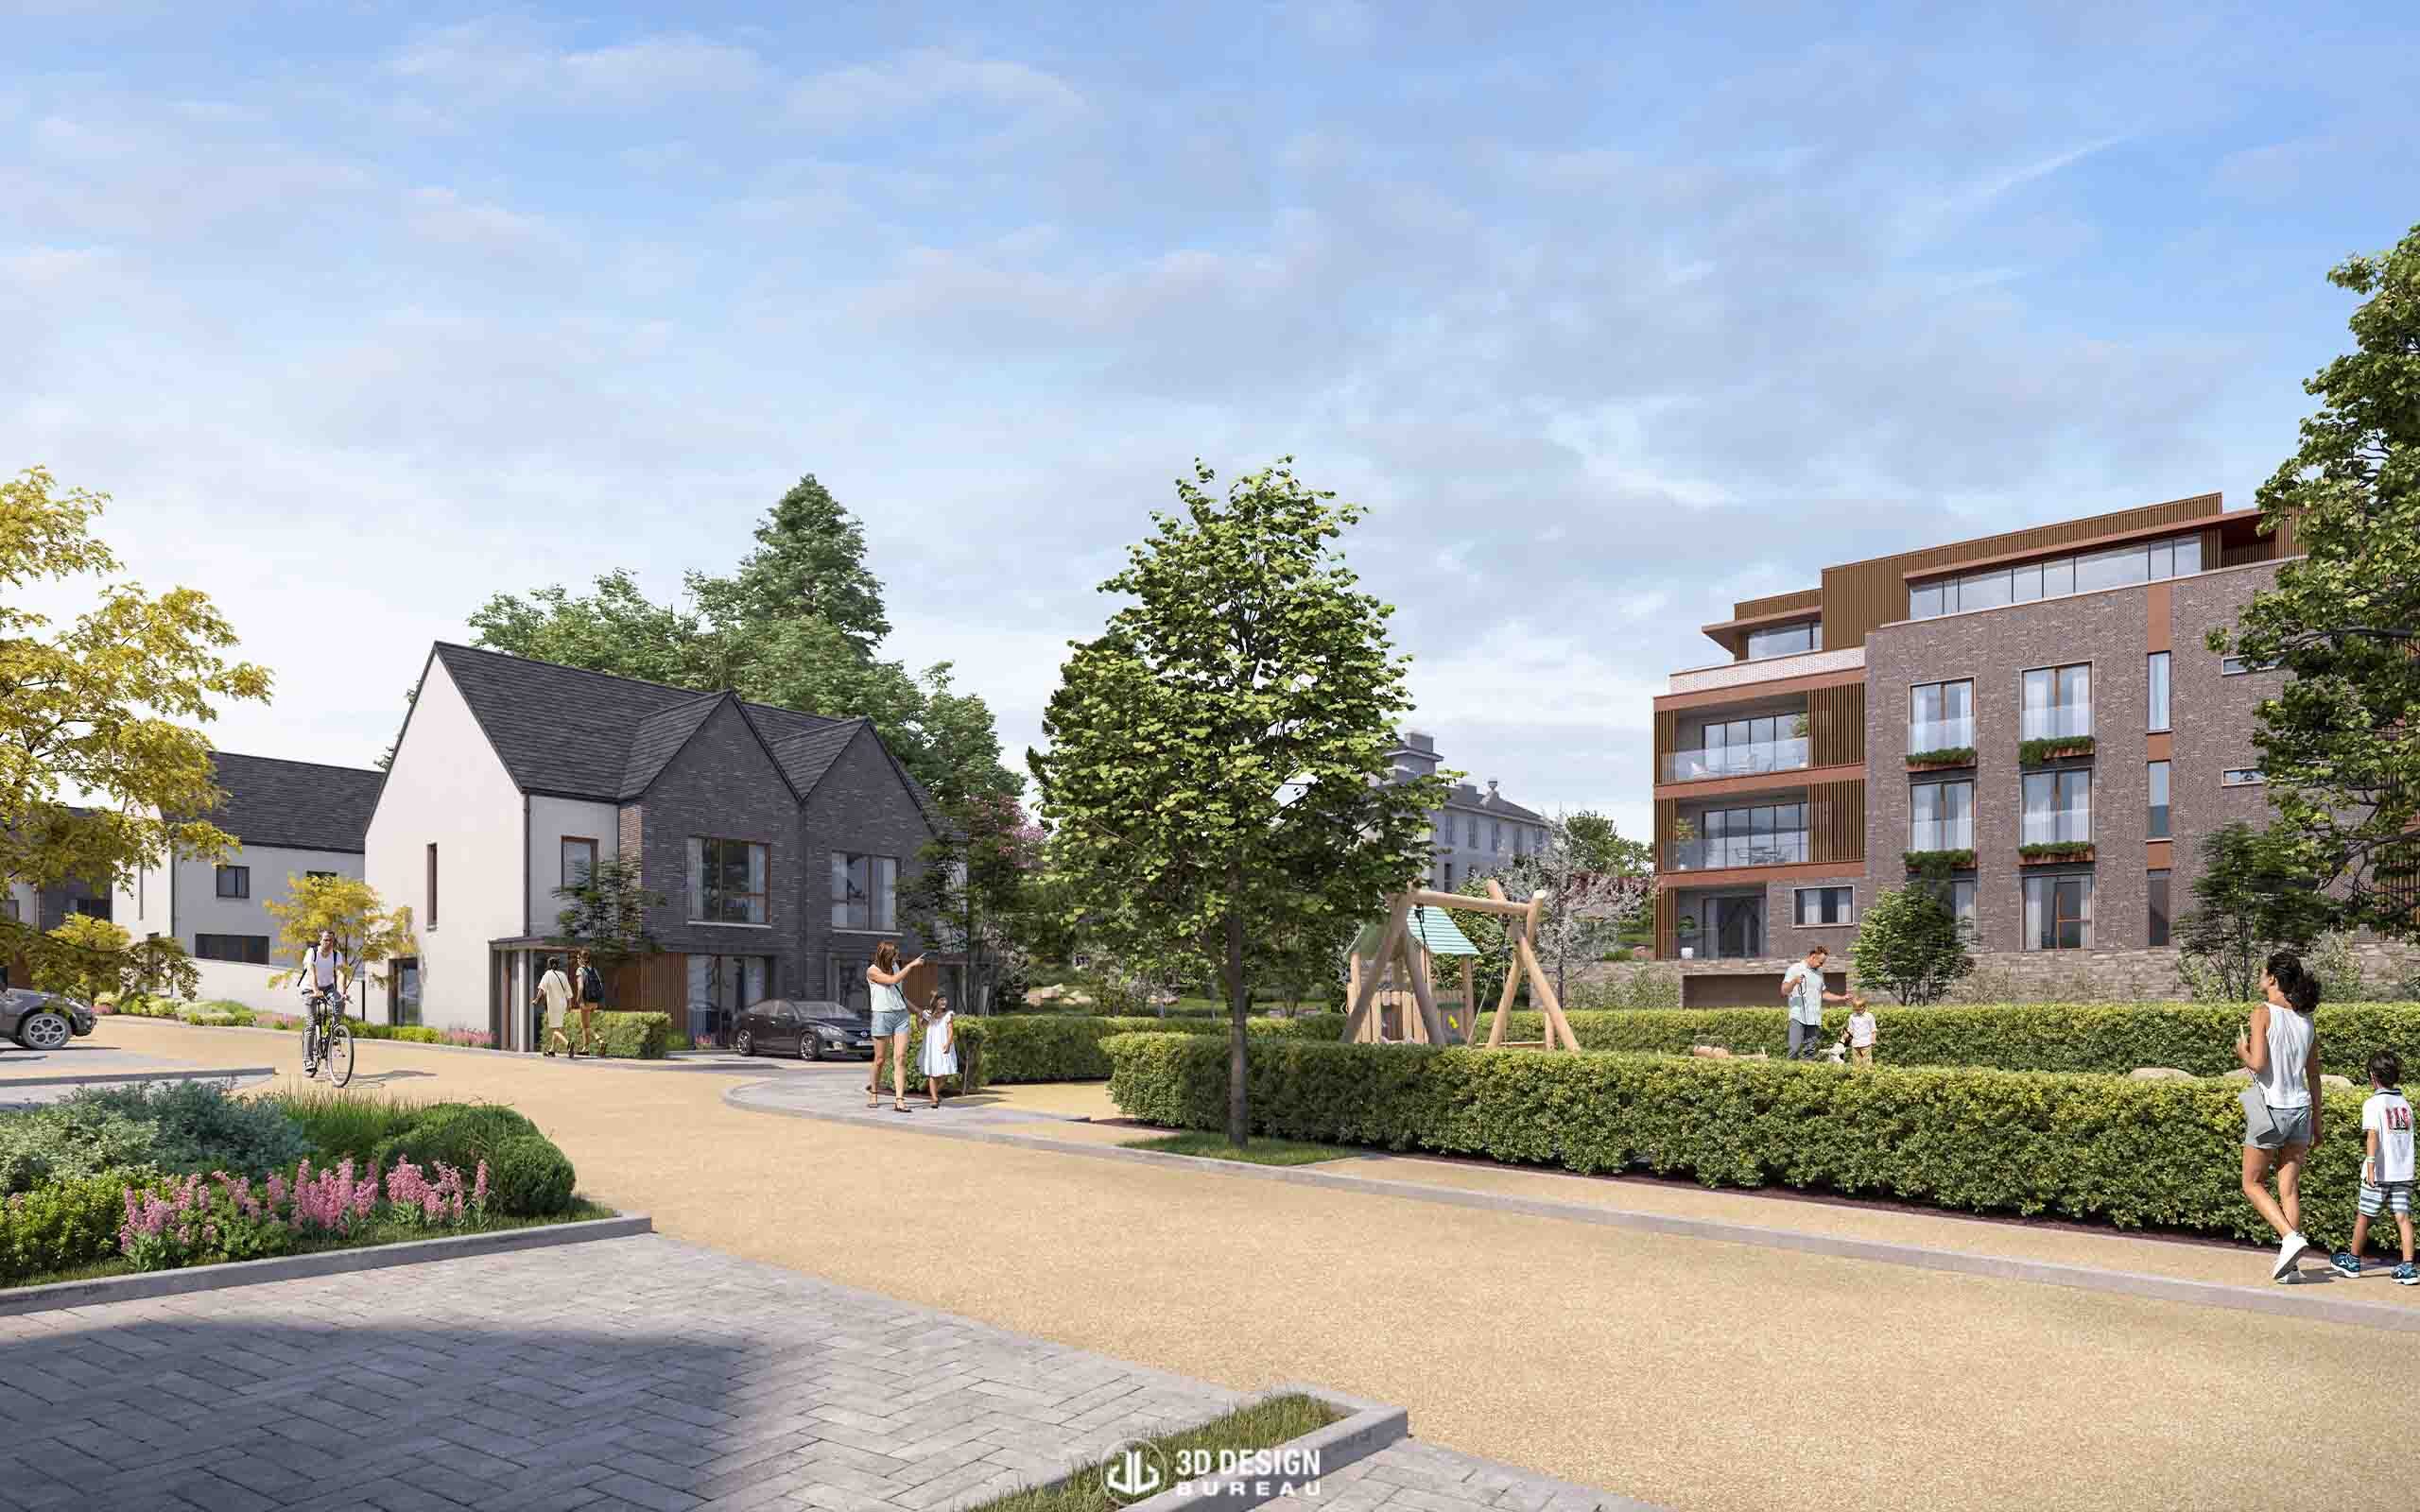 Computer generated imagery of the proposed development in Delgany